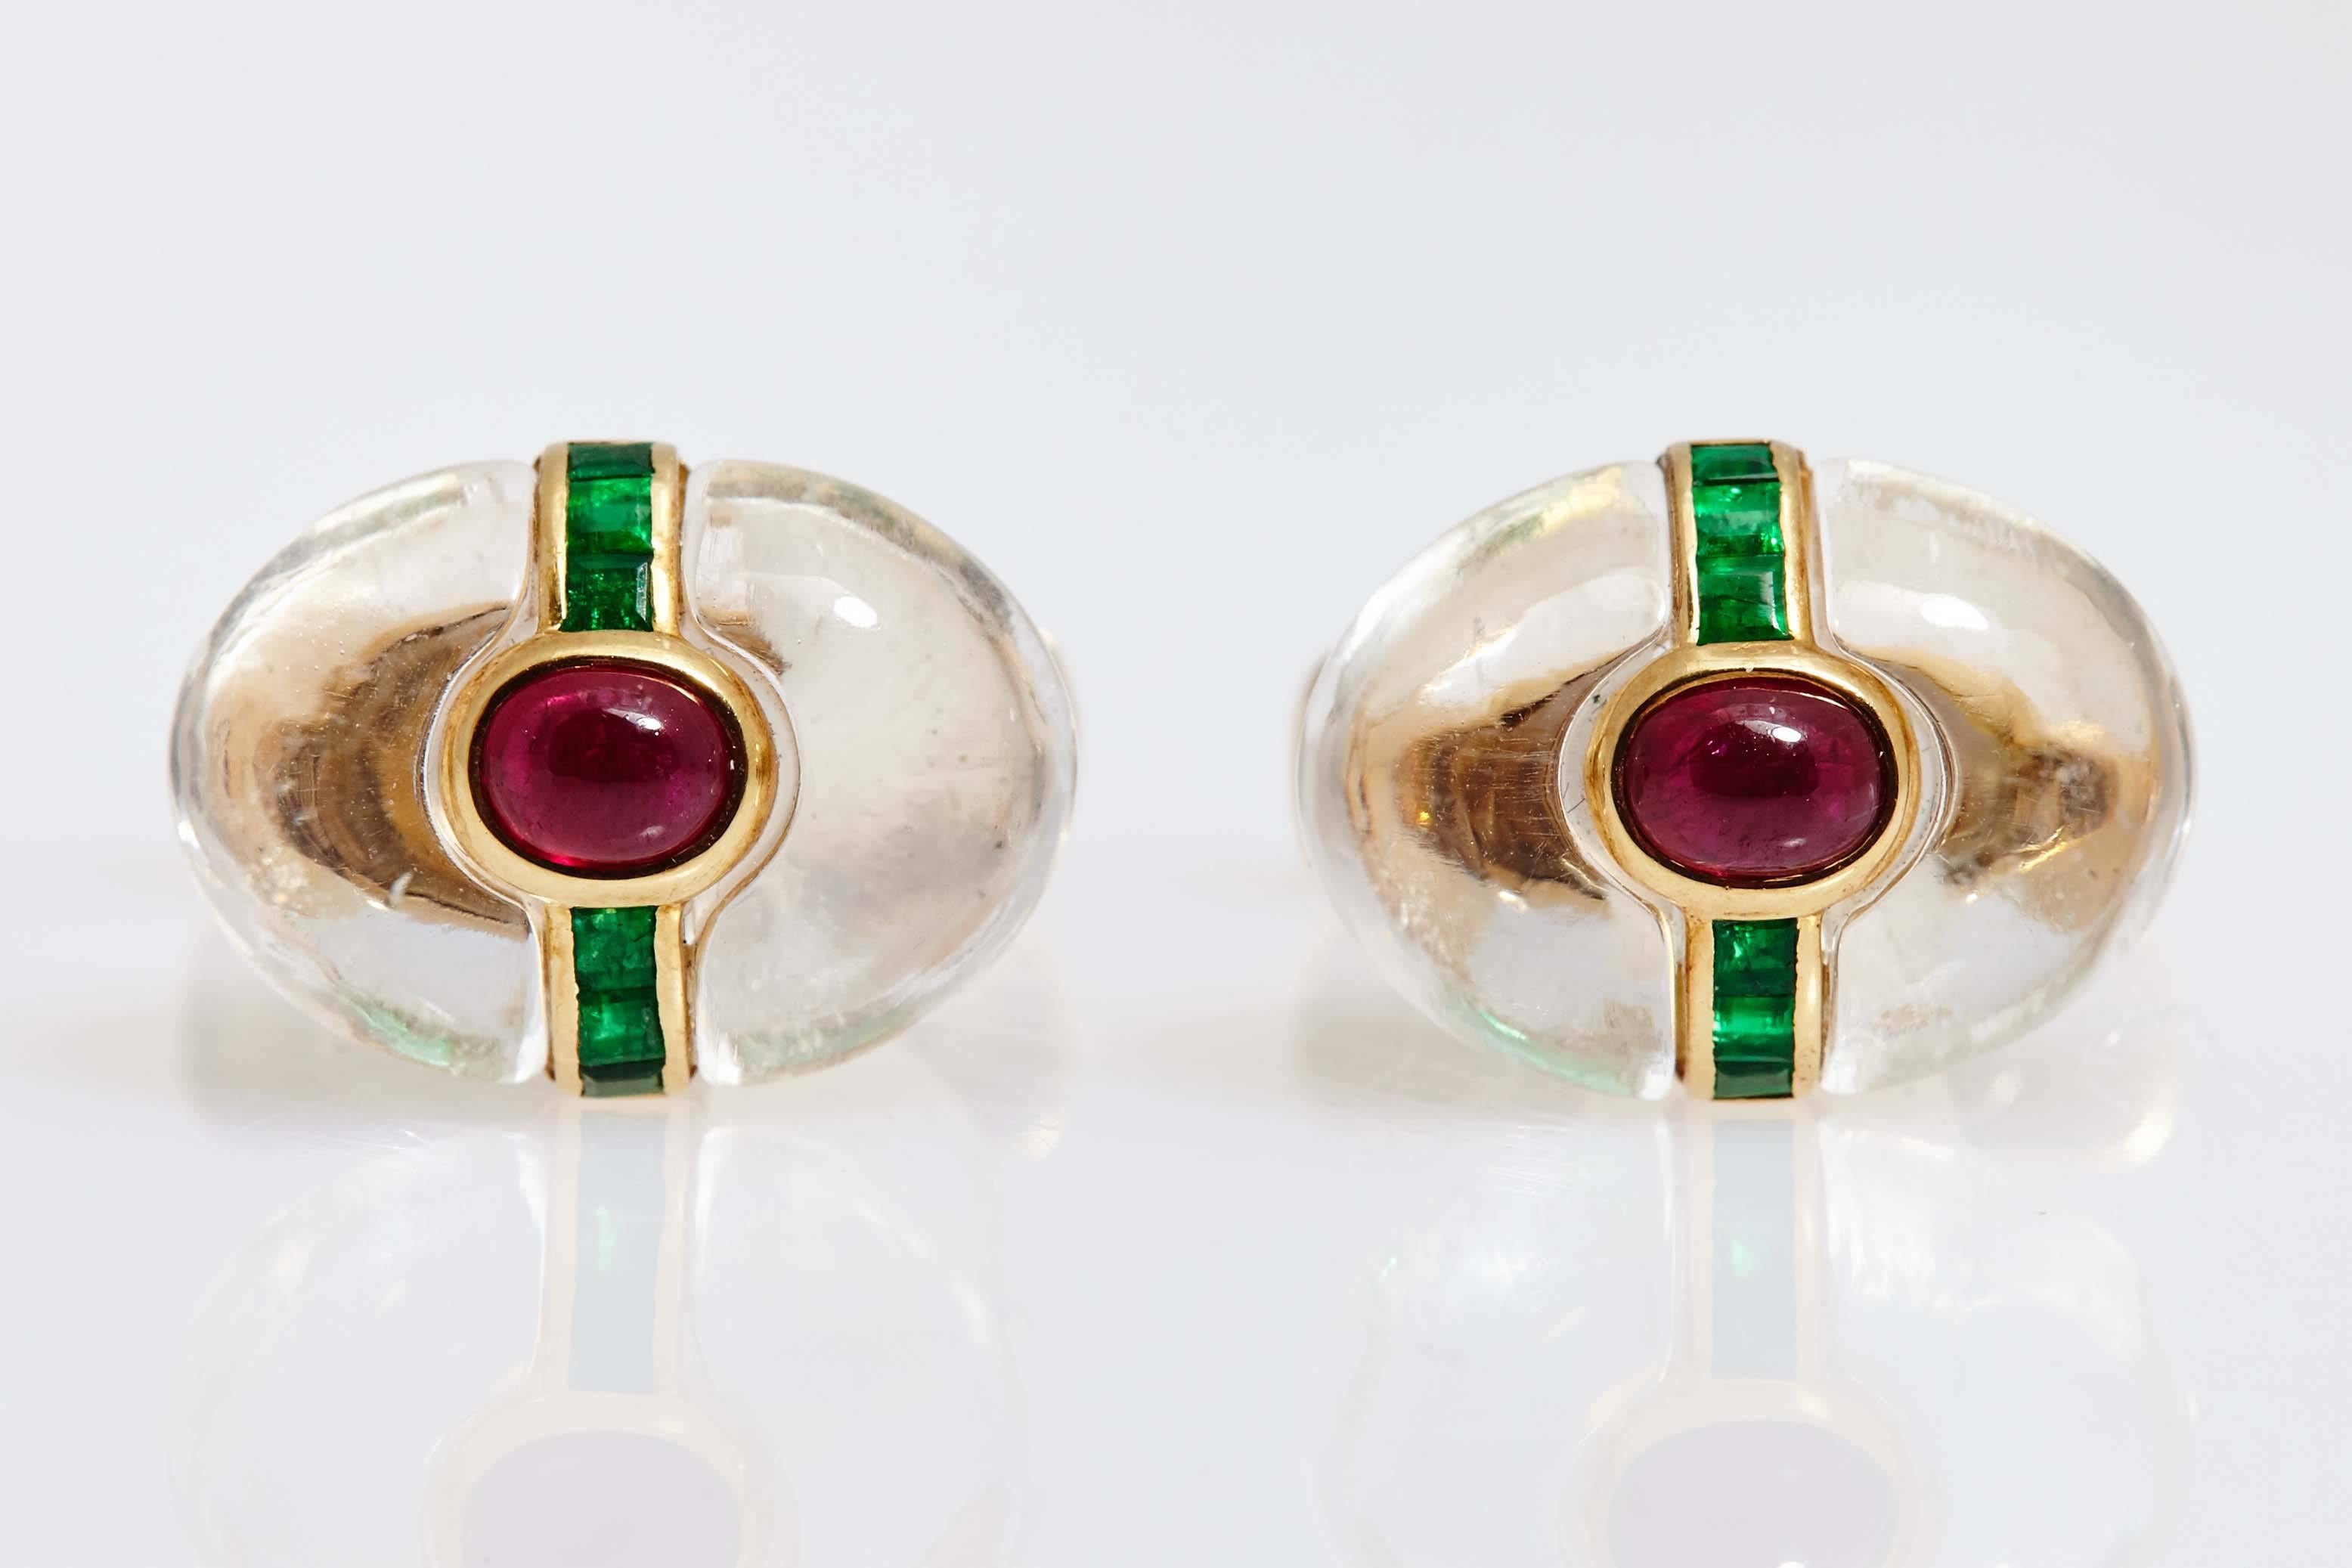 A pair of iconic Dolce Vita period cufflinks with rock crystal, cabochon rubies and emeralds, mounted on 18kt yellow gold. By Bulgari, circa 1965.